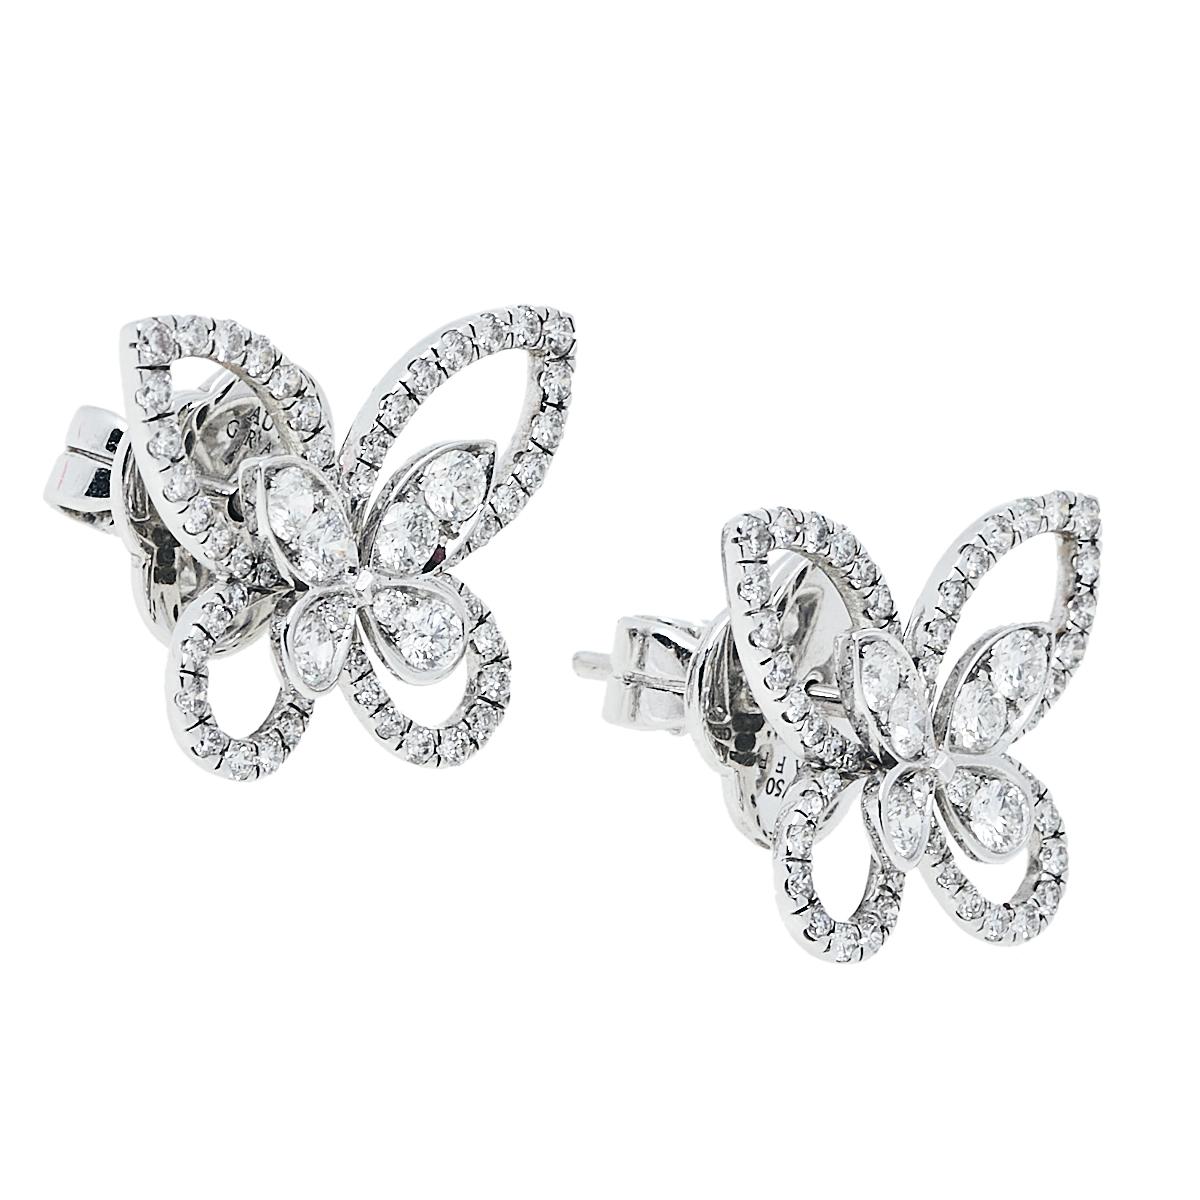 The 'butterfly' has long been a signature symbol of Graff and it does make a dazzling appearance in this breathtaking pair of earrings! This stunning pair comes crafted from 18K white gold featuring a cut-out butterfly motif as the stud beautifully